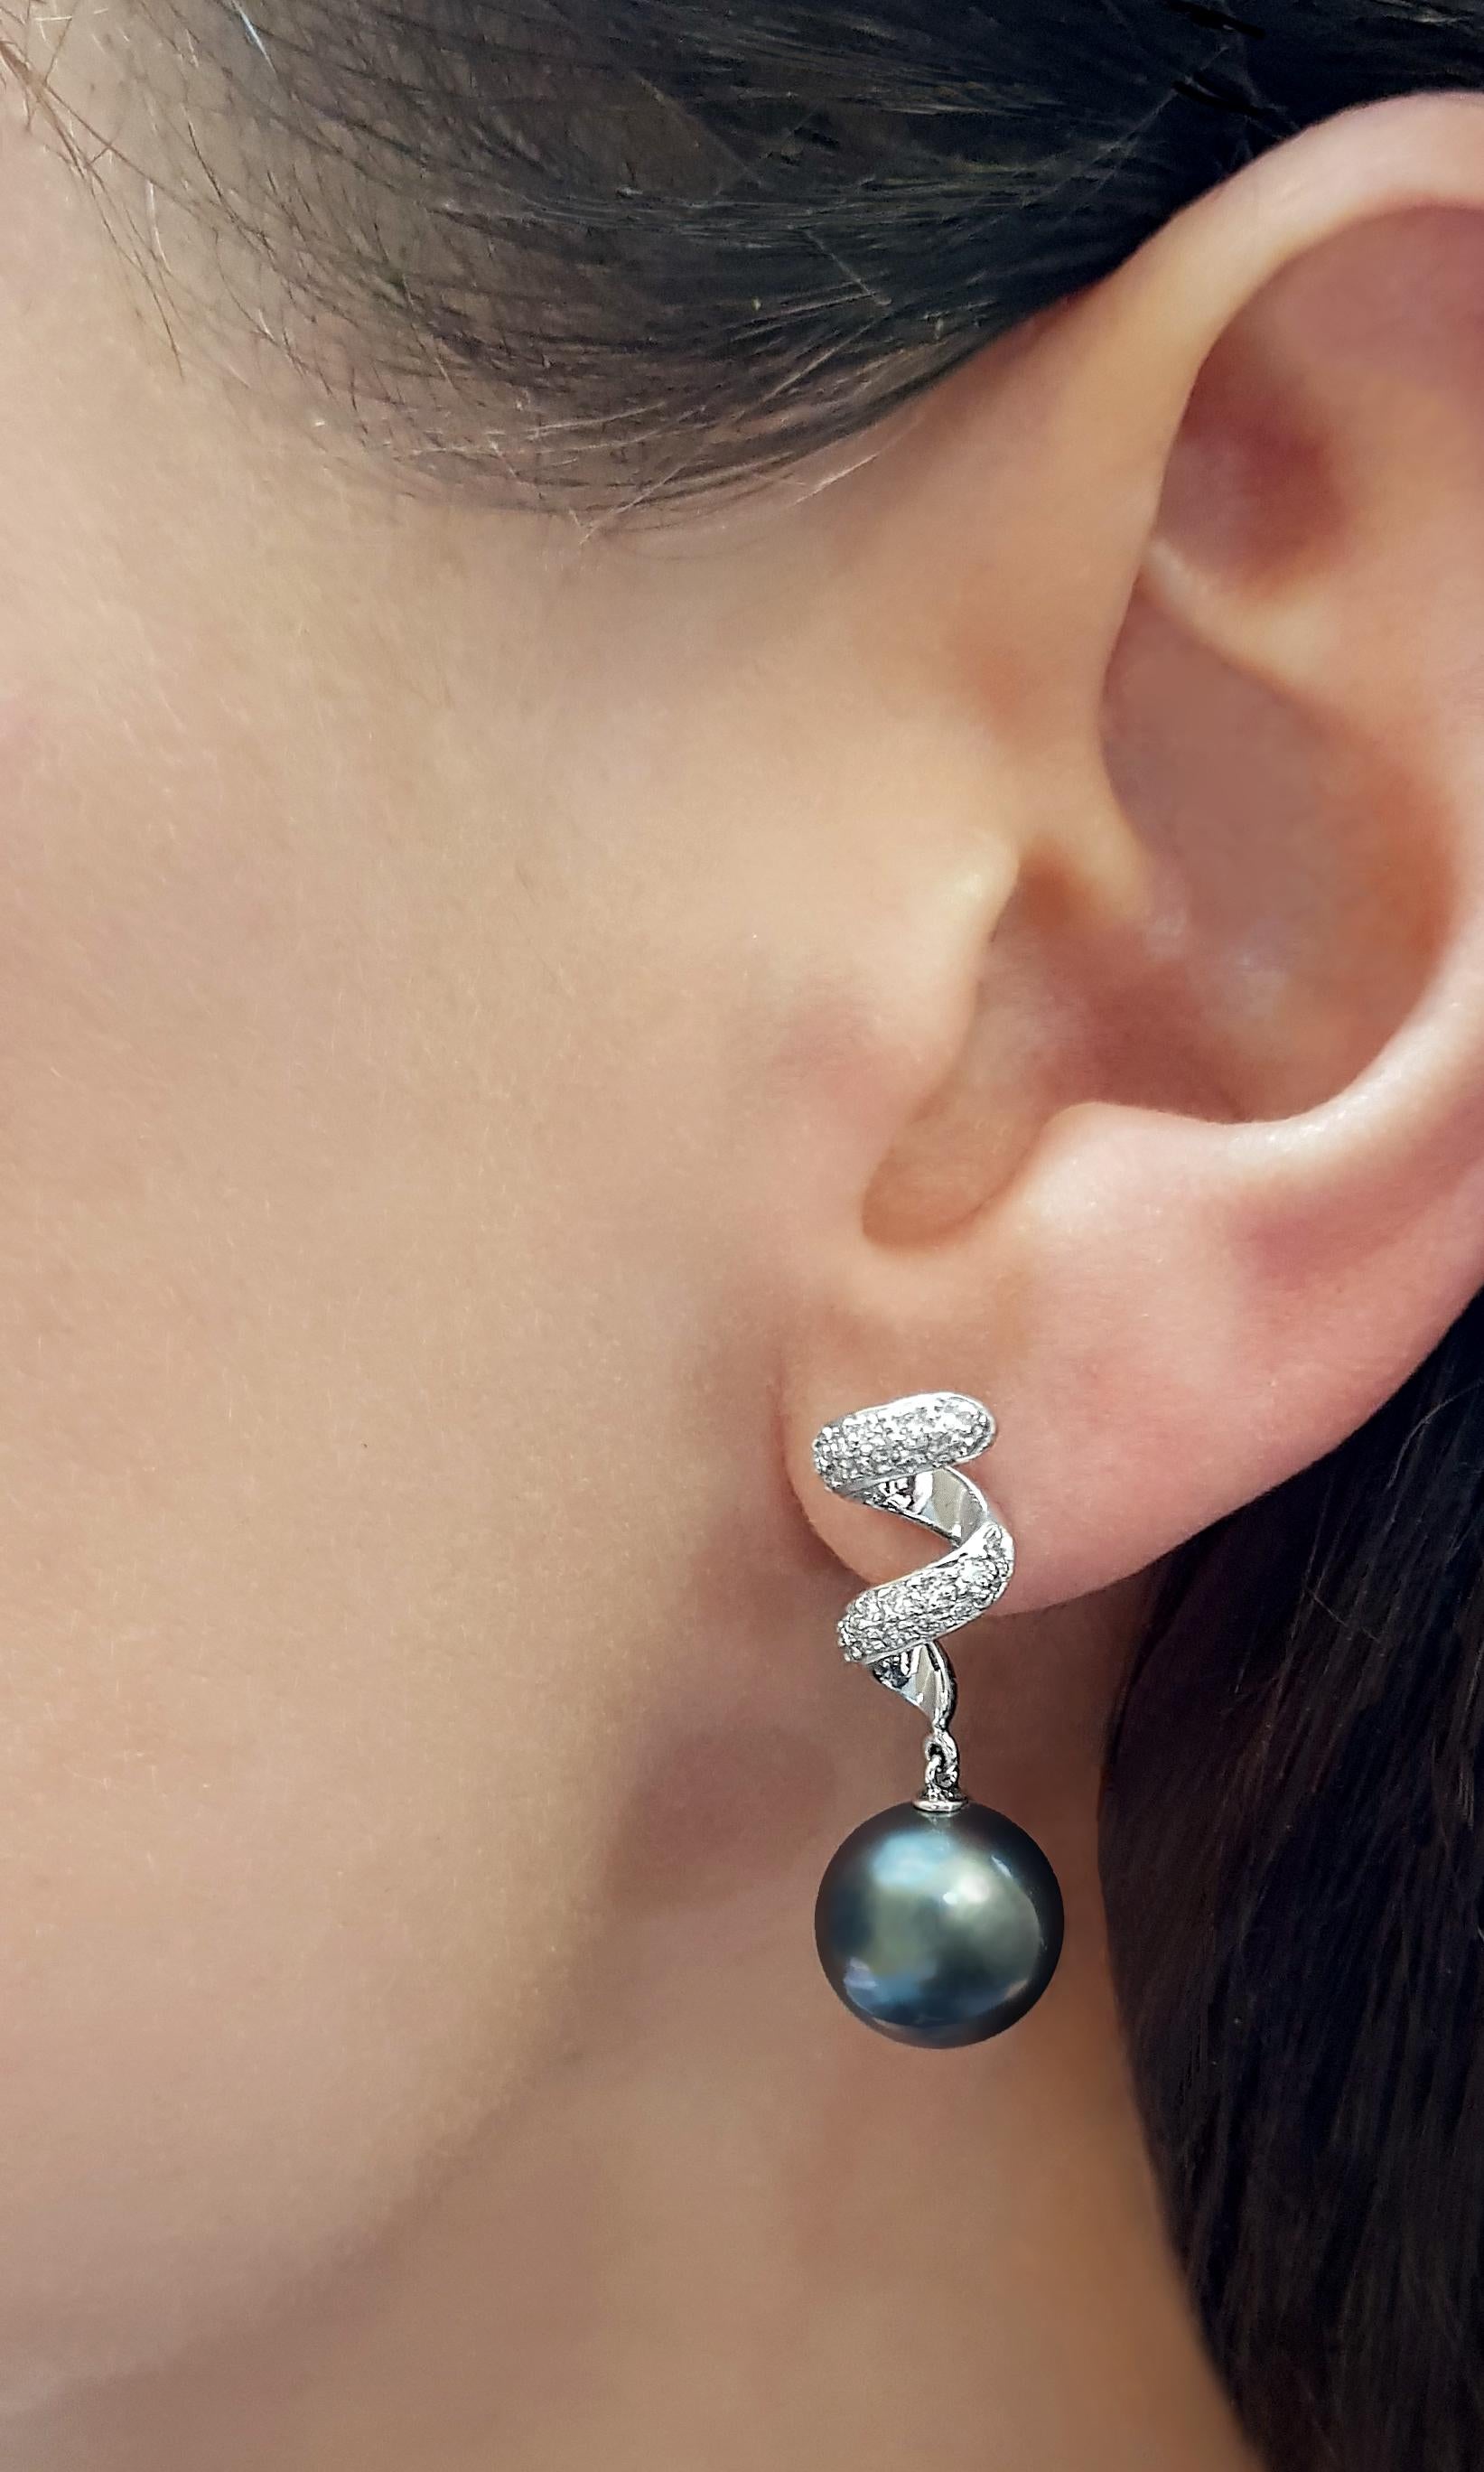 These modern earrings by Yoko London feature lustrous Tahitian pearls beneath a contemporary swirl of diamonds. Set in 18 Karat white gold to enhance the rich hues of the pearls and the white sparkle of the diamonds, these earrings exude luxurious